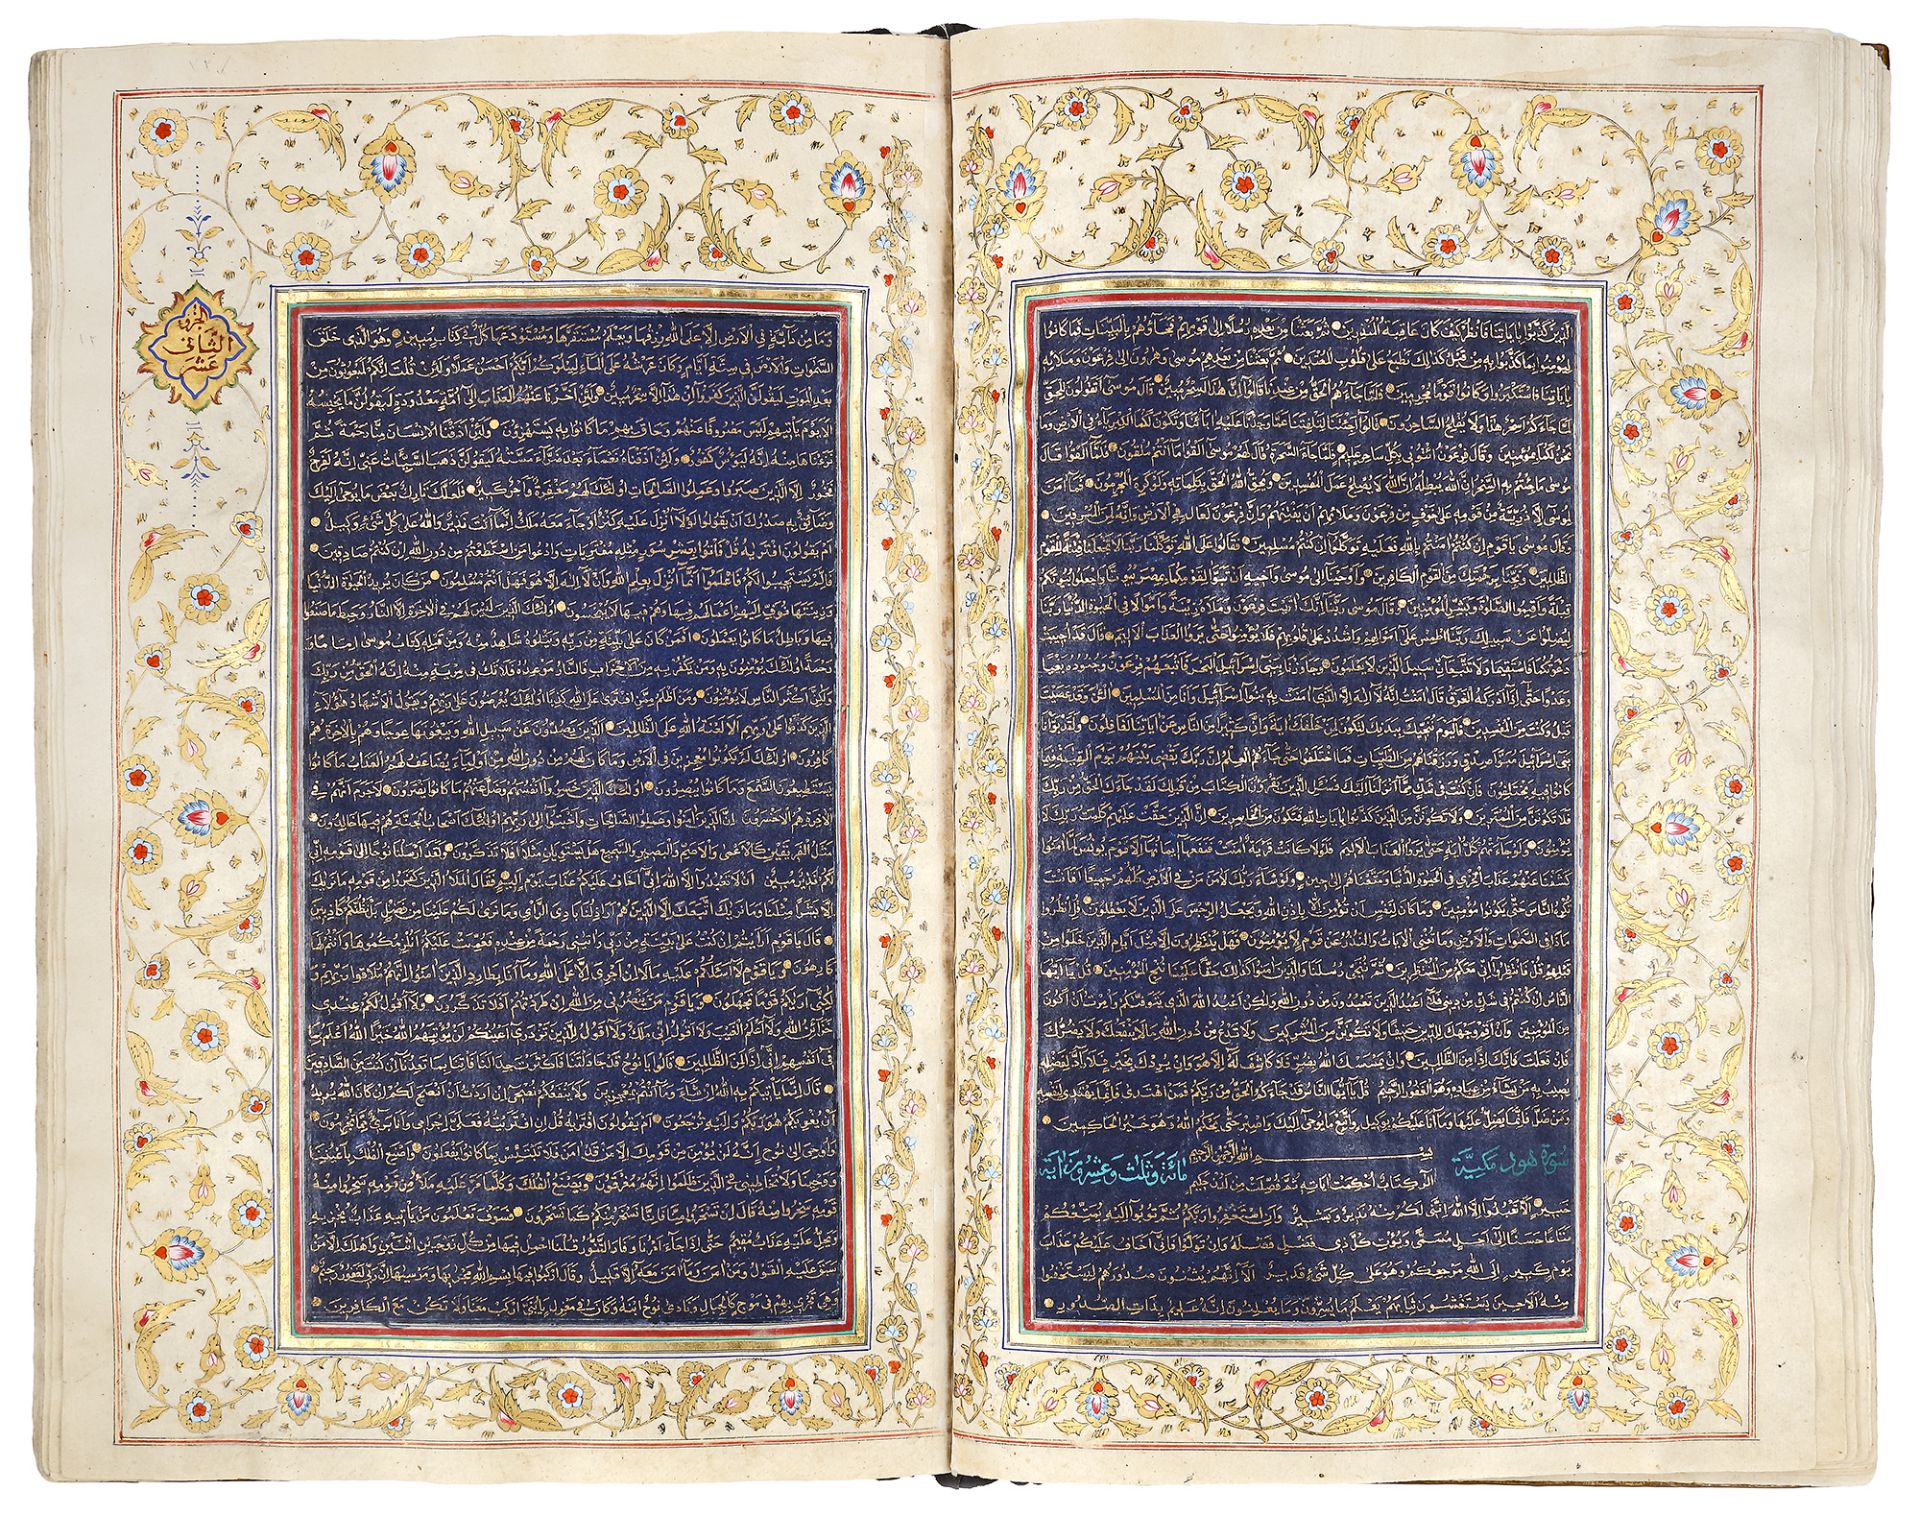 AN ILLUMINATED QURAN, PERSIA, LATE 19TH-EARLY 20TH CENTURY - Image 21 of 27